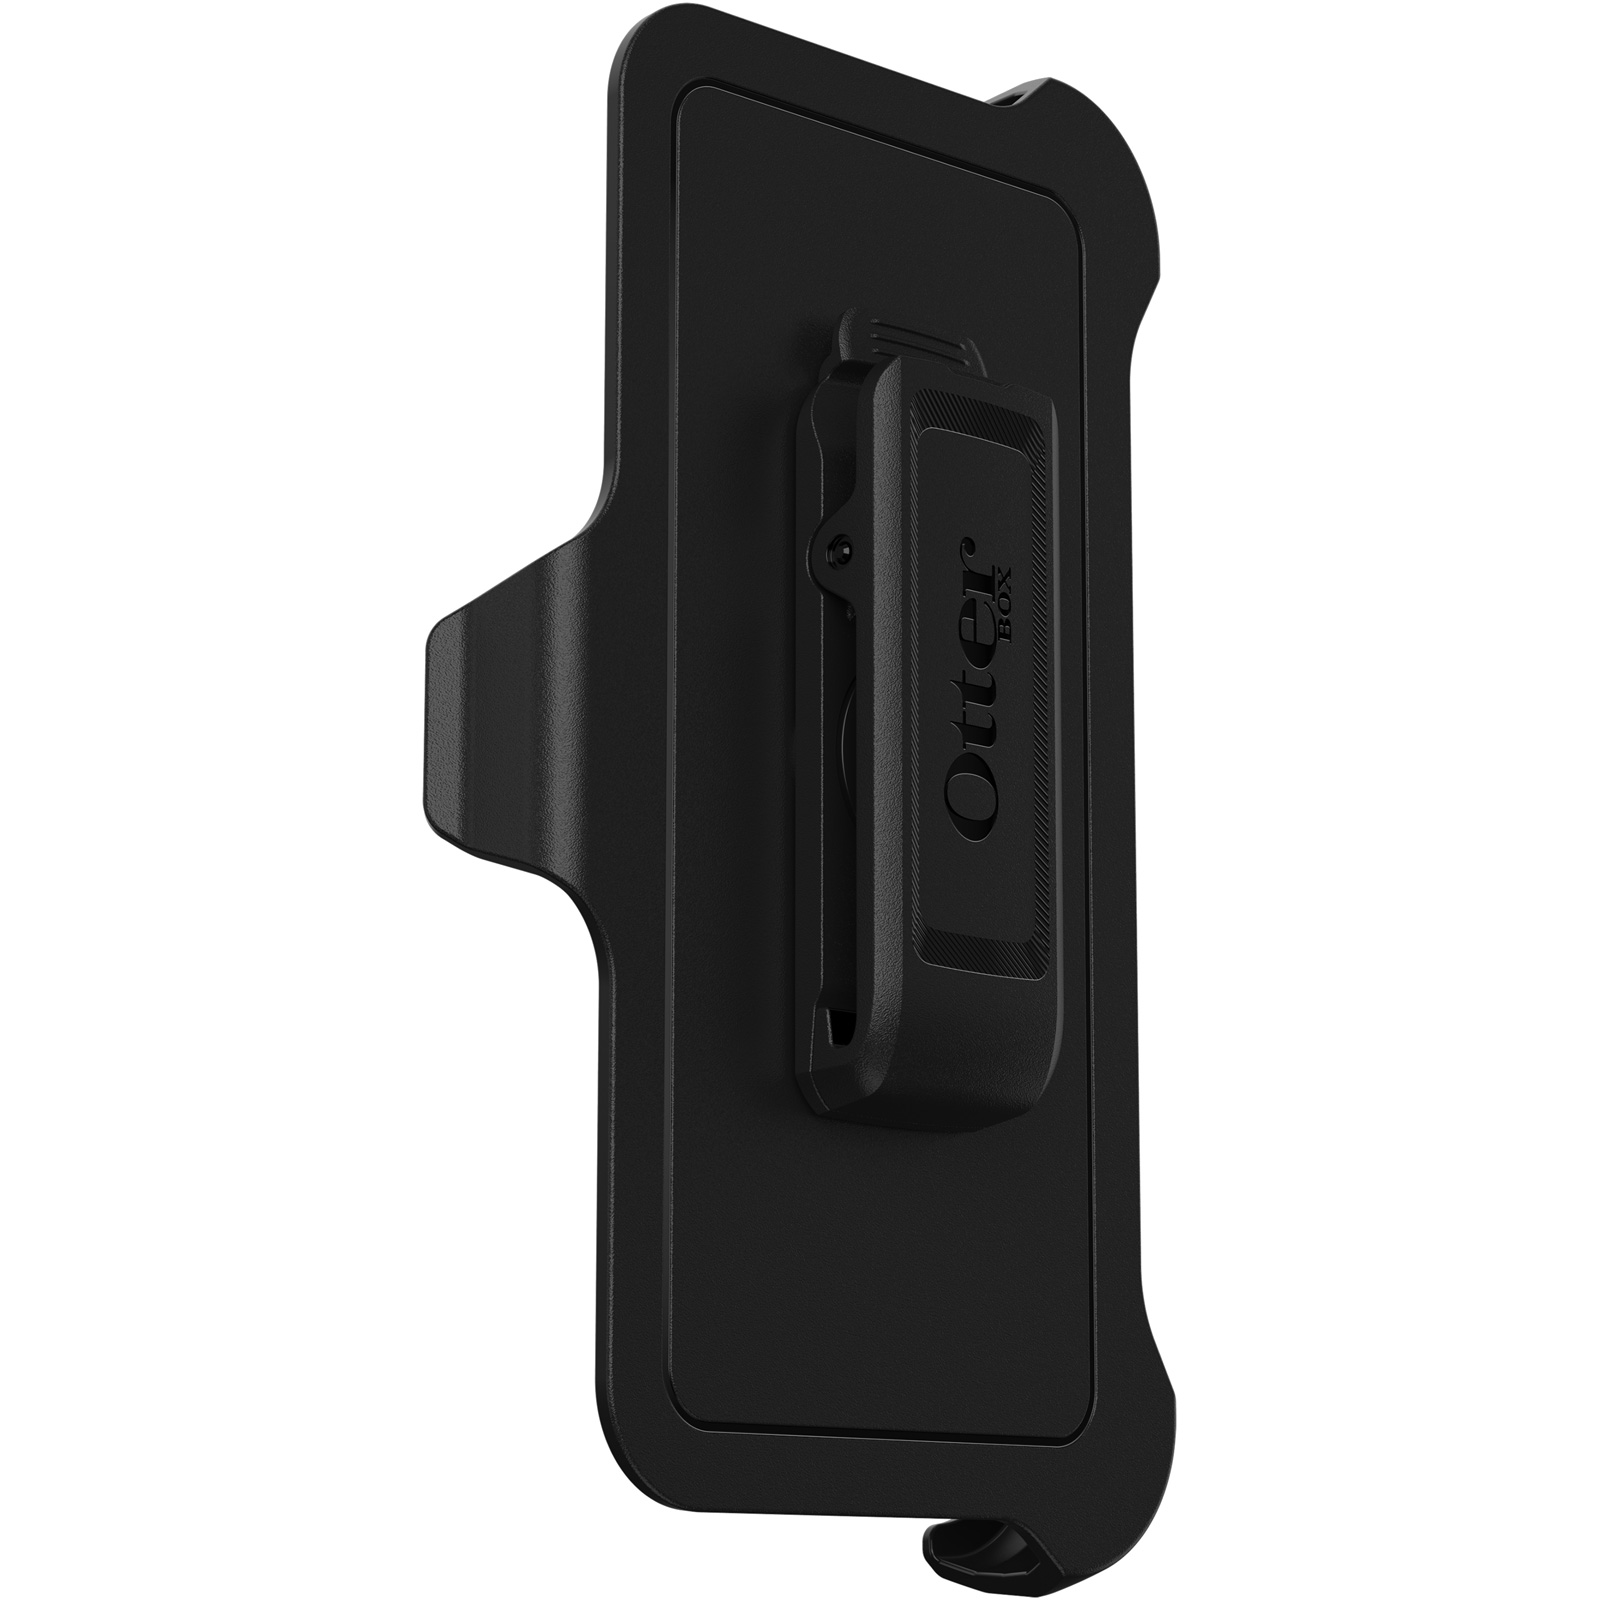 For iPhone 8 / 8 Plus Case [Clip Fits Otterbox Defender] Holster